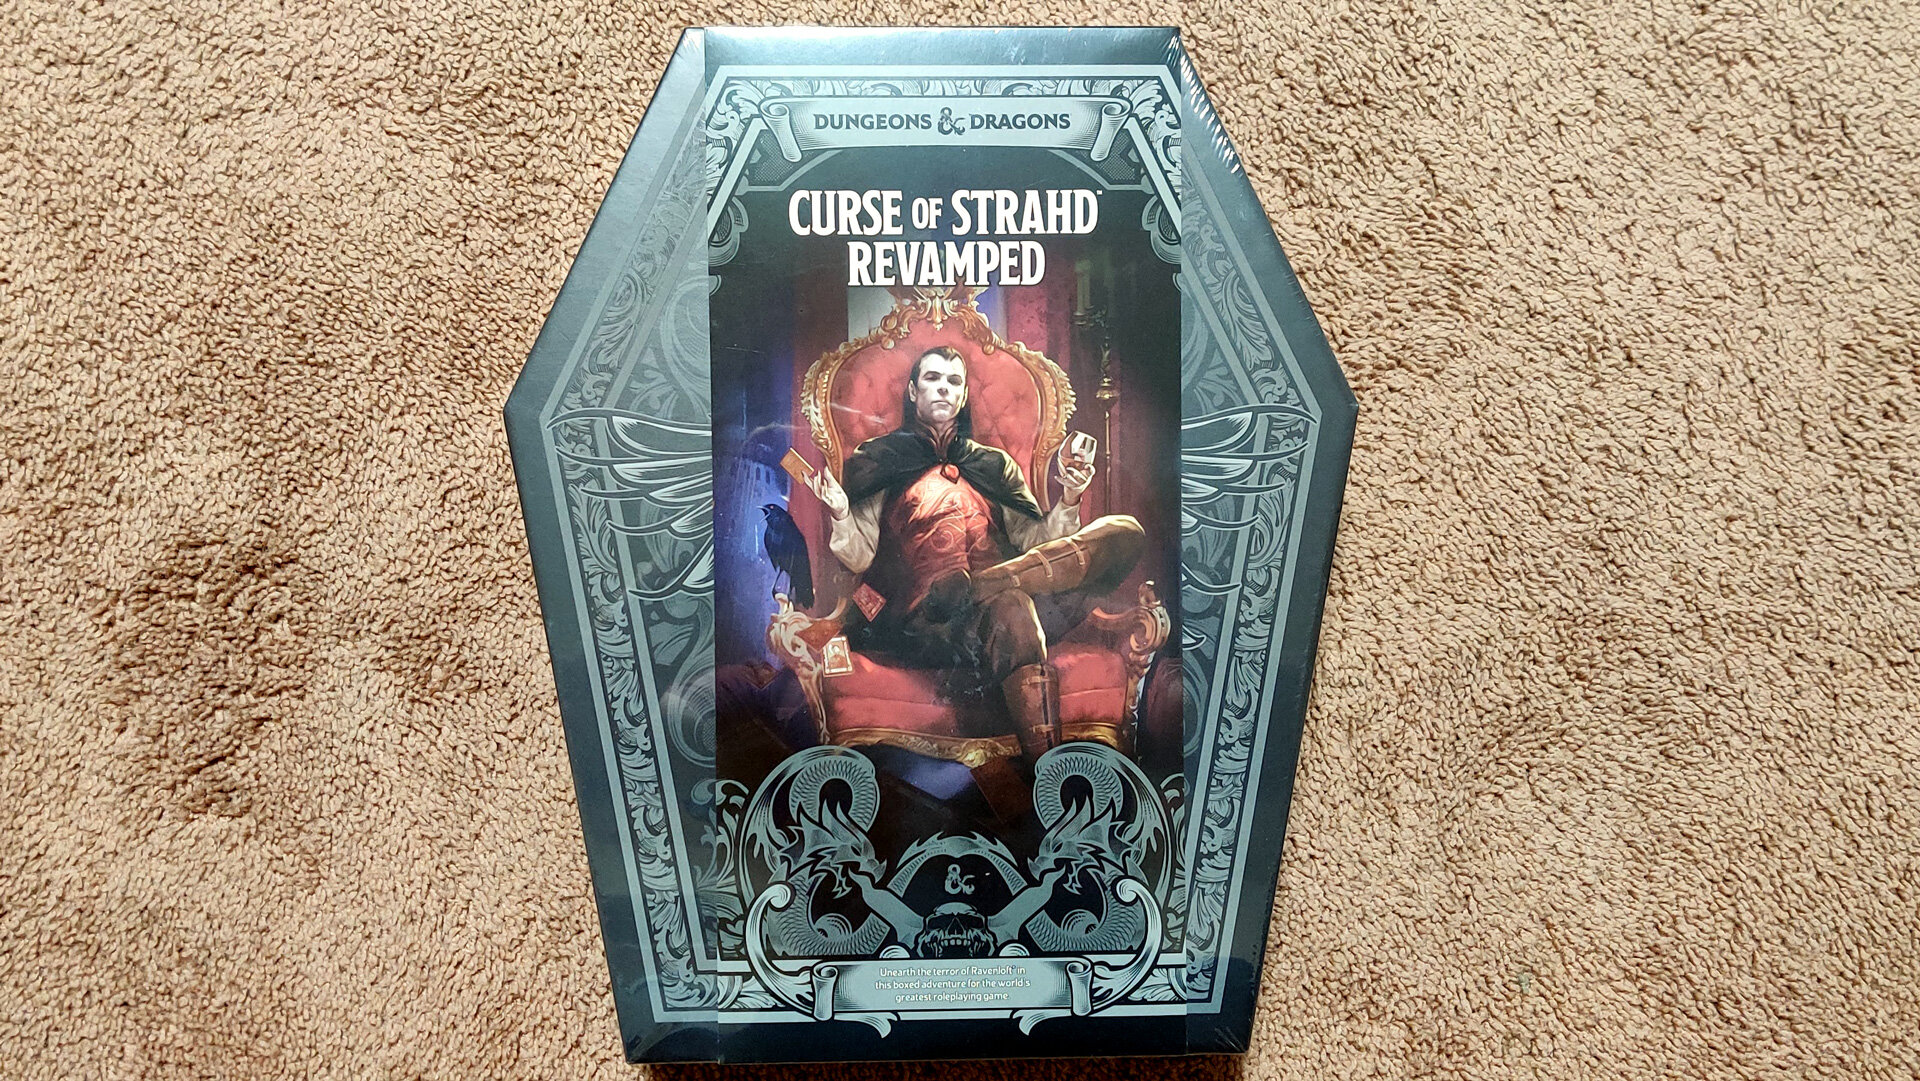 Curse of Strahd – Slick Dungeon's Dusty Tomes and Terrible Films